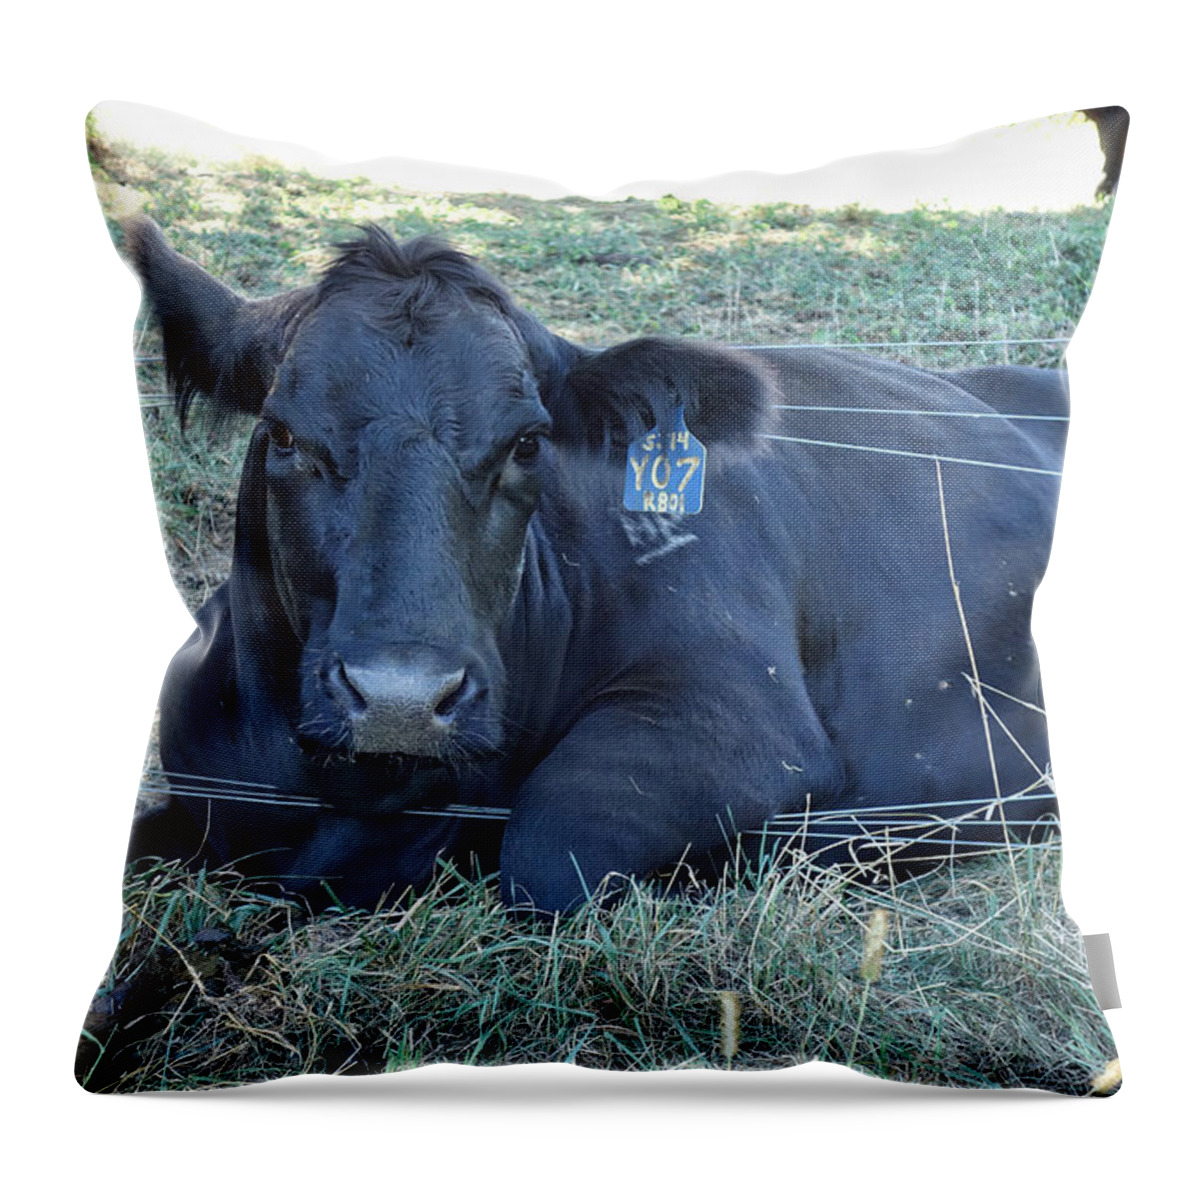 Wildlife Throw Pillow featuring the photograph Yo7 Caught in Fence by Russ Considine